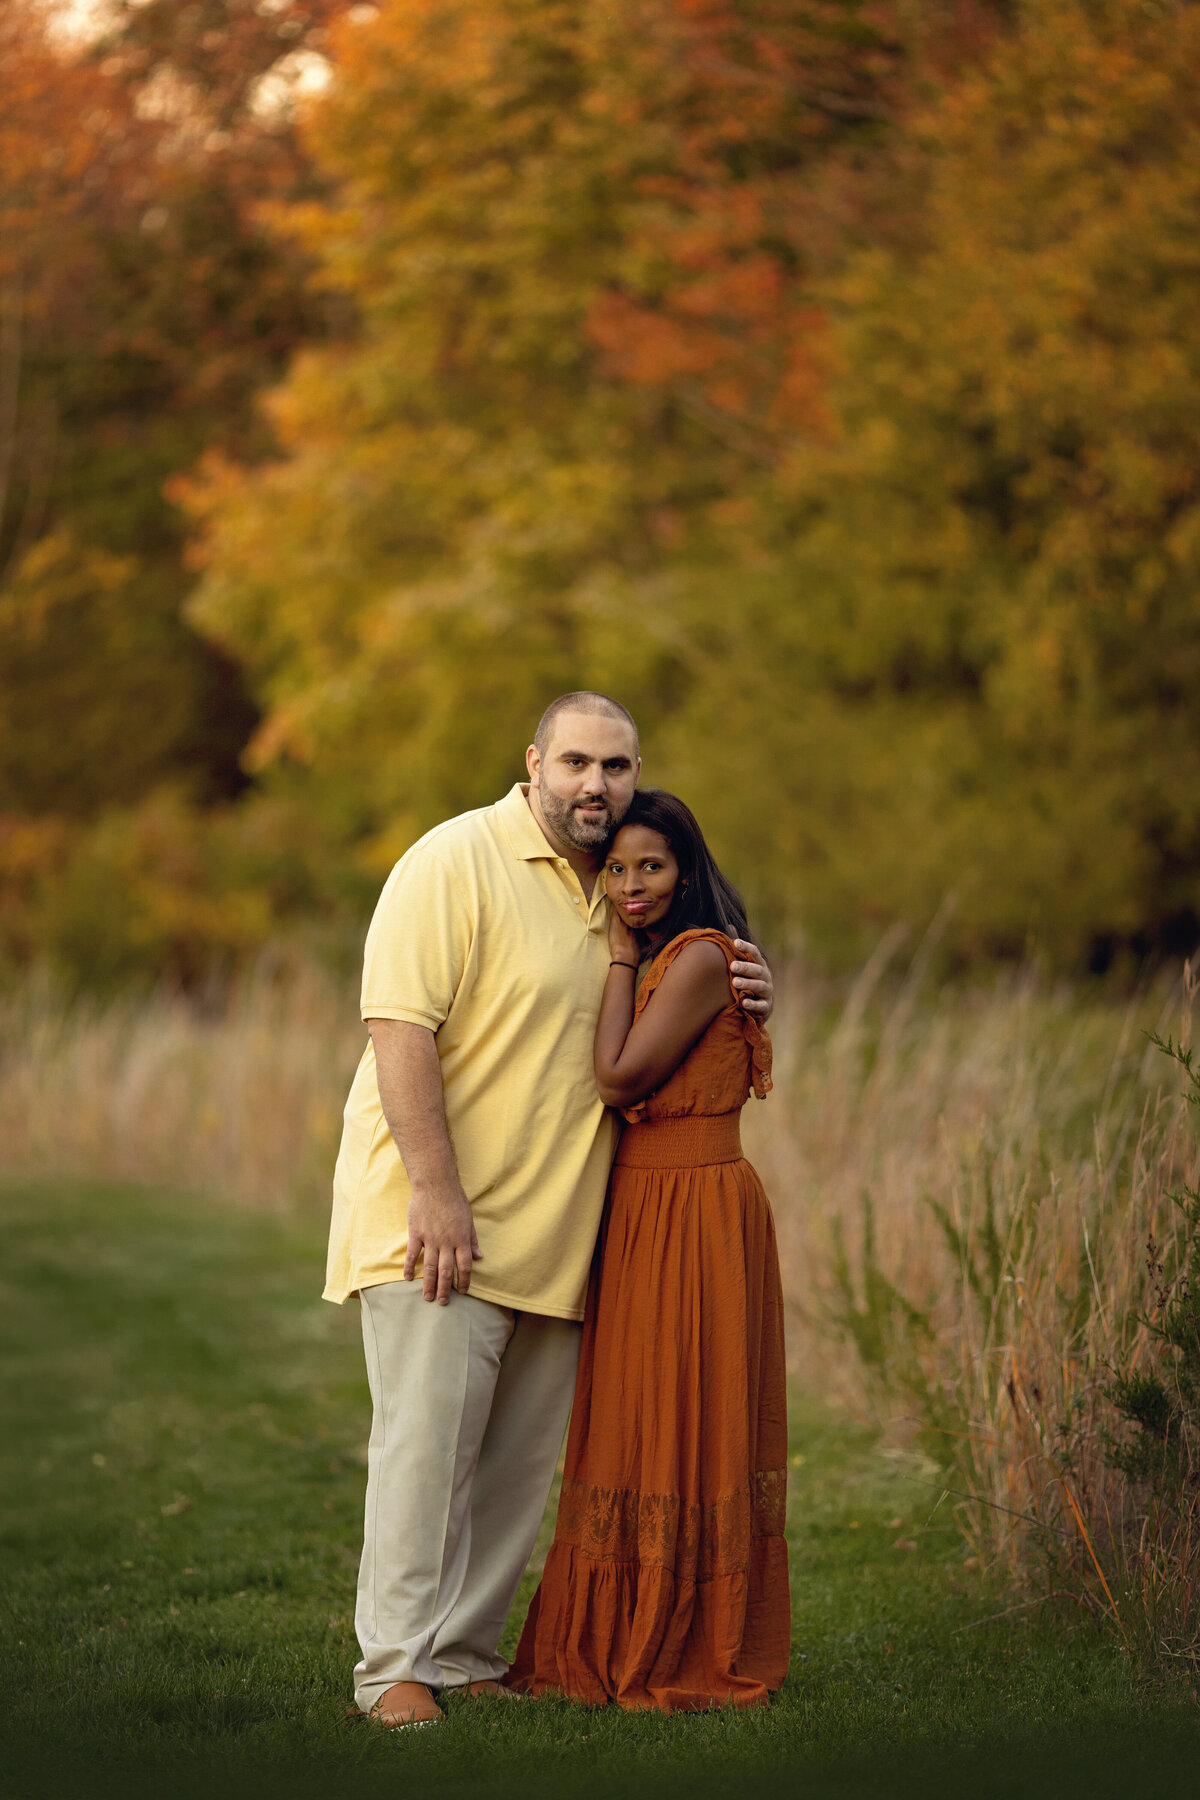 A mother in a red dress leans into the chest of her husband in a yellow shirt in a park at sunset